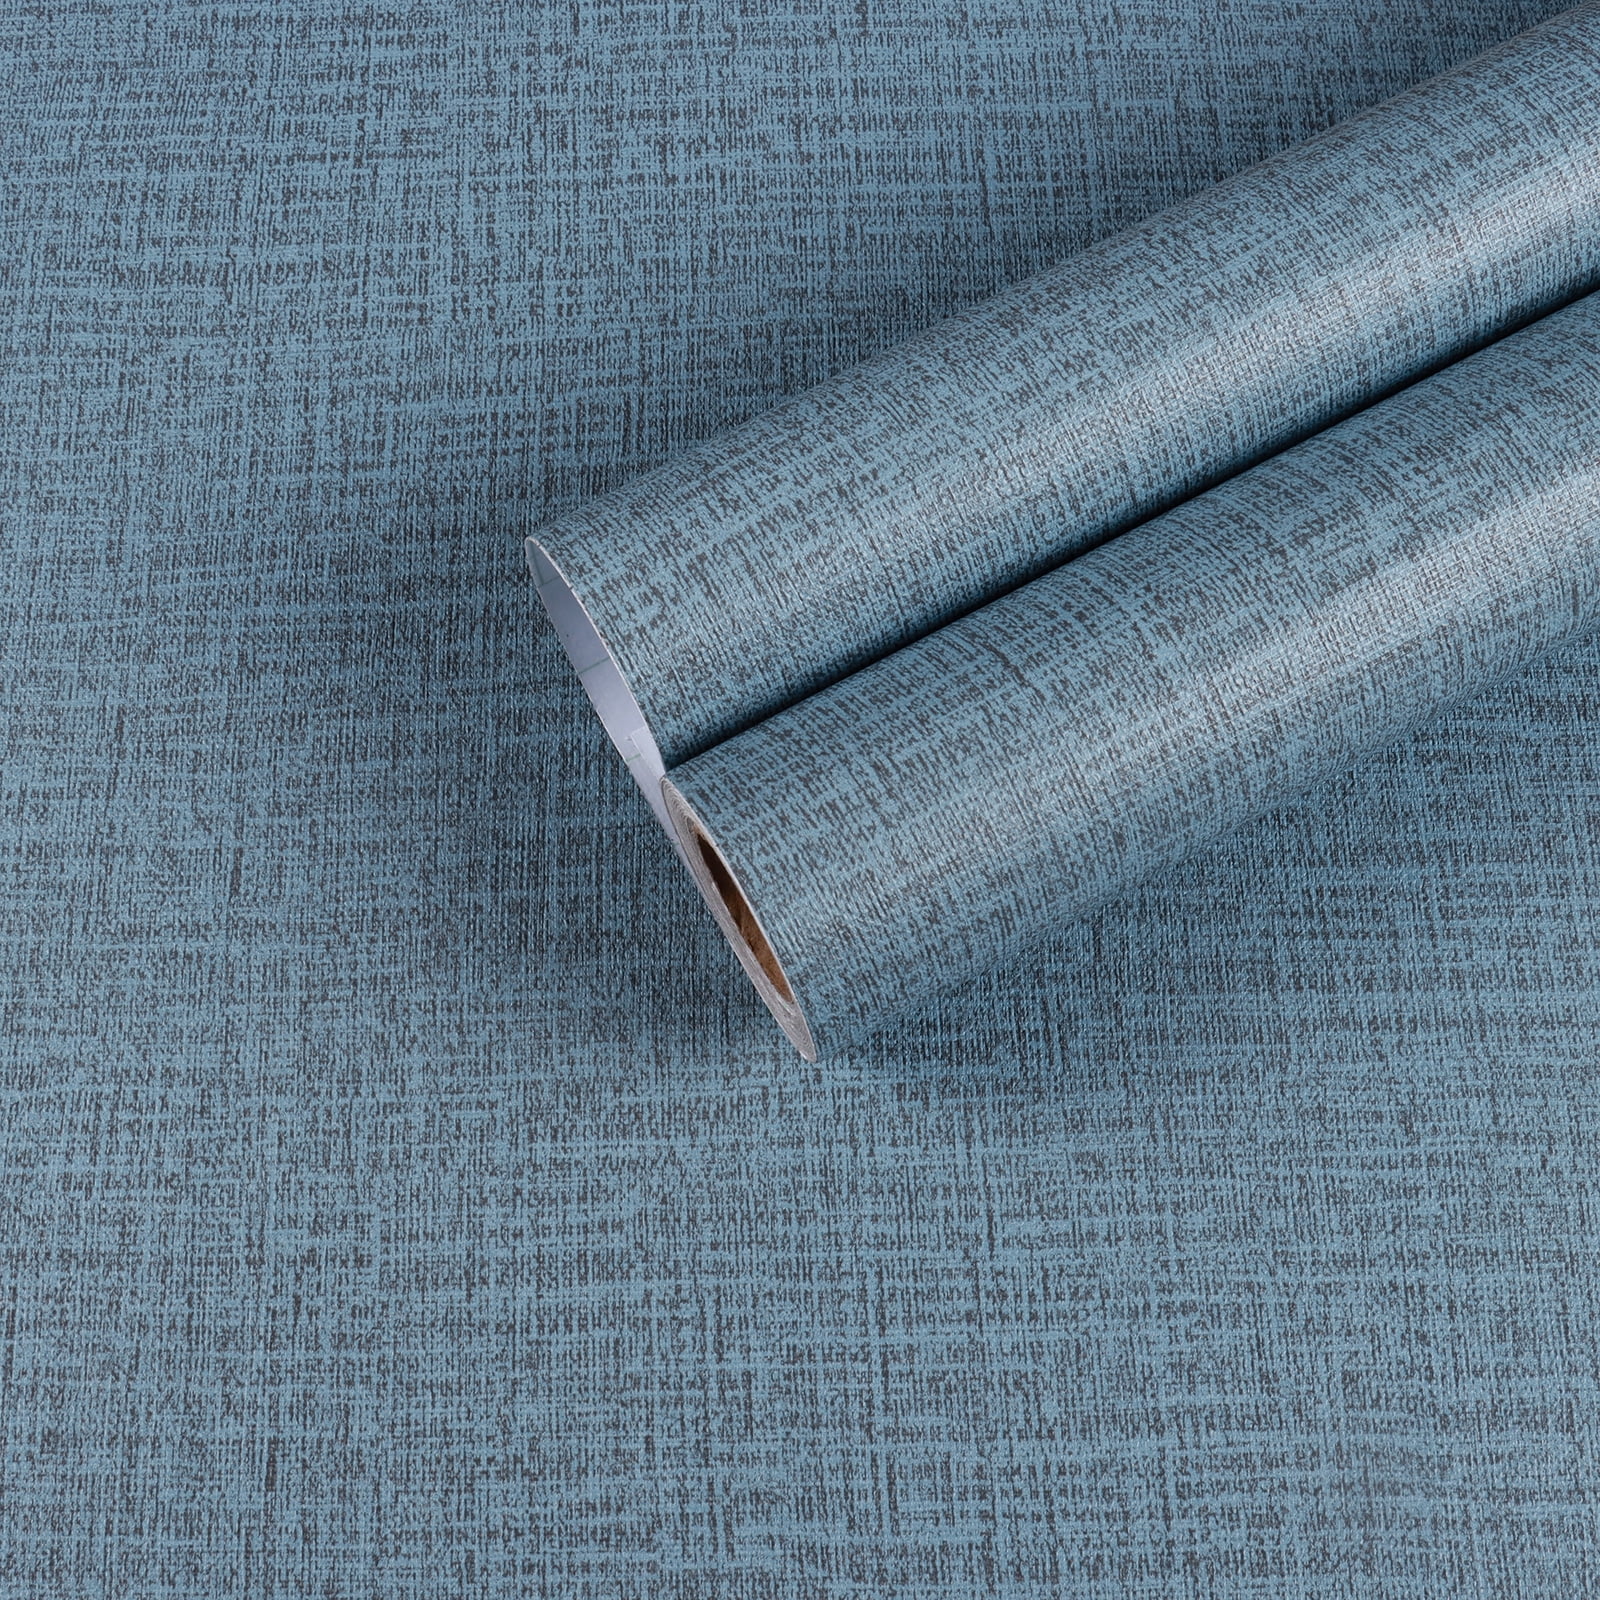 GYX1054 Grace  Gardenia Tropical Blue Faux Grasscloth Peel and Stick  Wallpaper 27x20  The Savvy Decorator